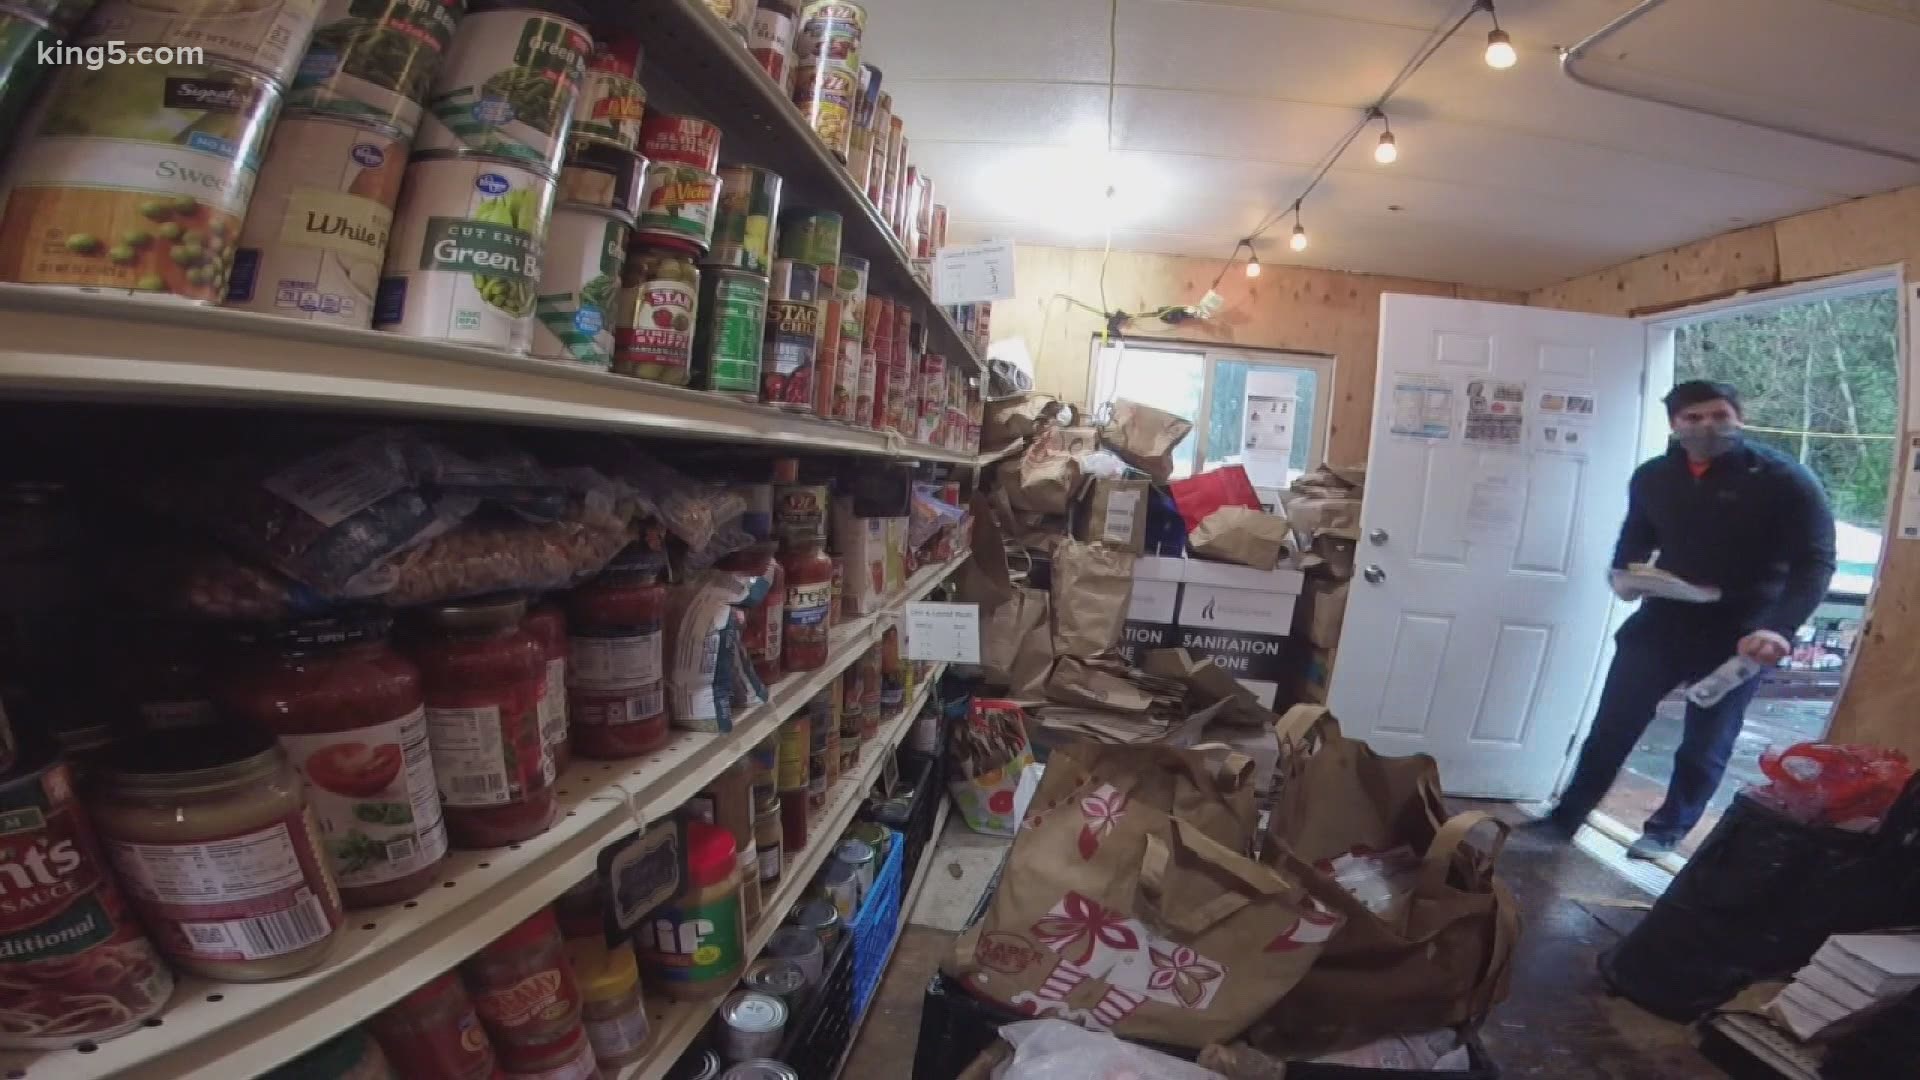 The Mill Creek Community Food Bank ran out of donations to feed families. They've seen a 115% increase in families using their services in 2020.